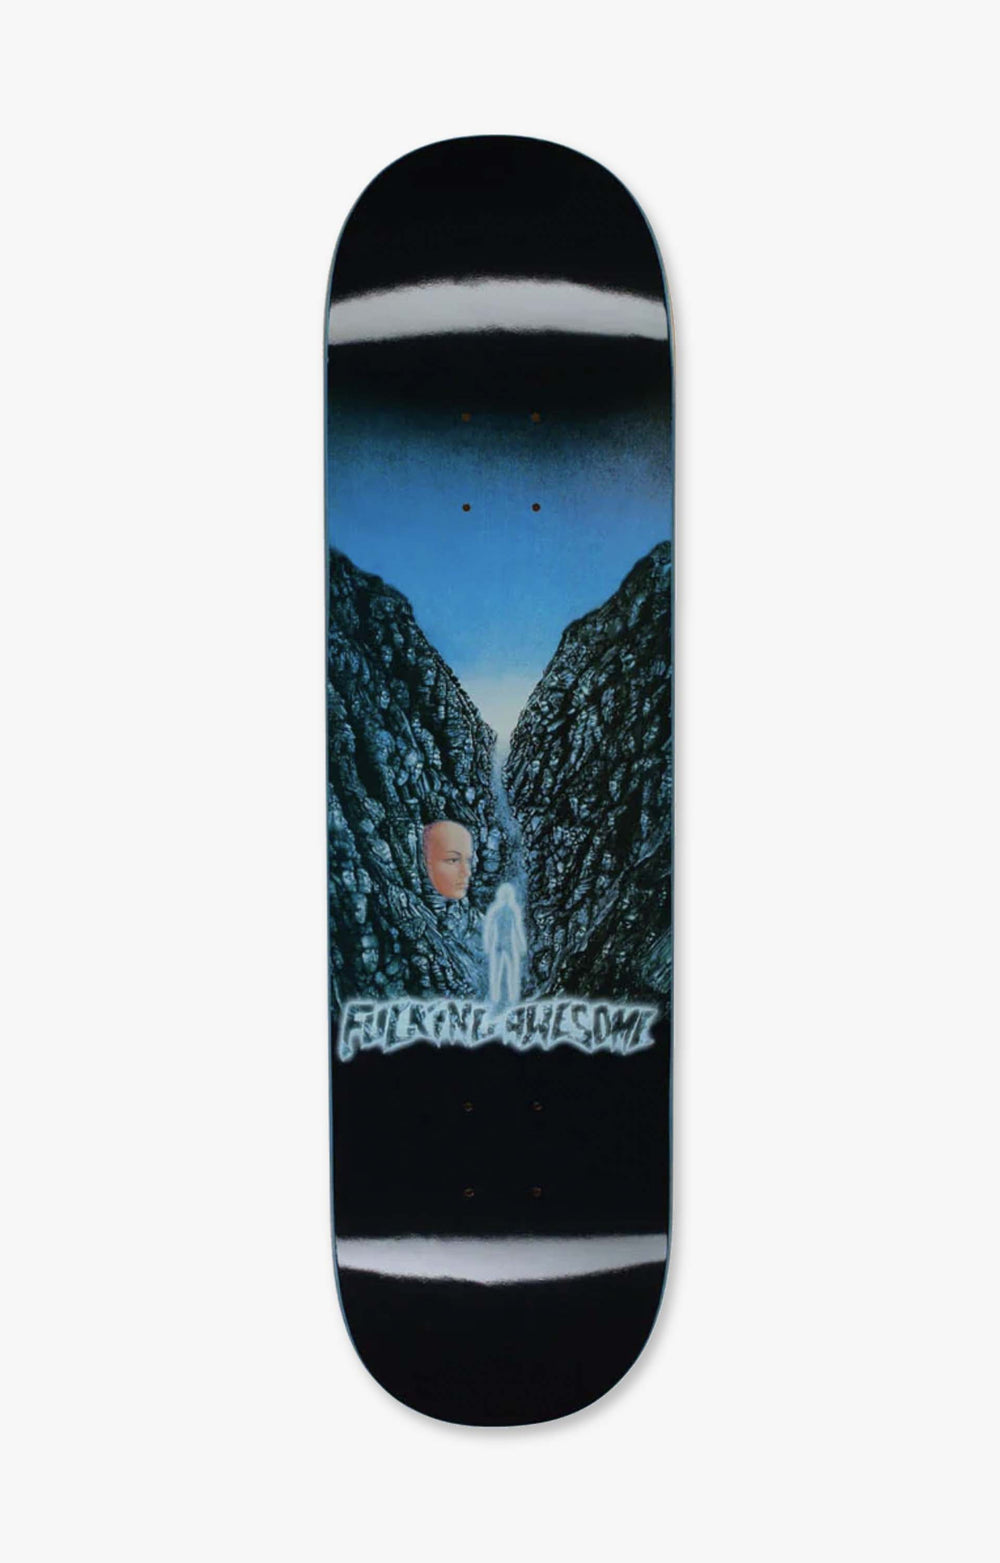 Fucking Awesome Vincent Waterfall Skateboard Deck, 8.25"